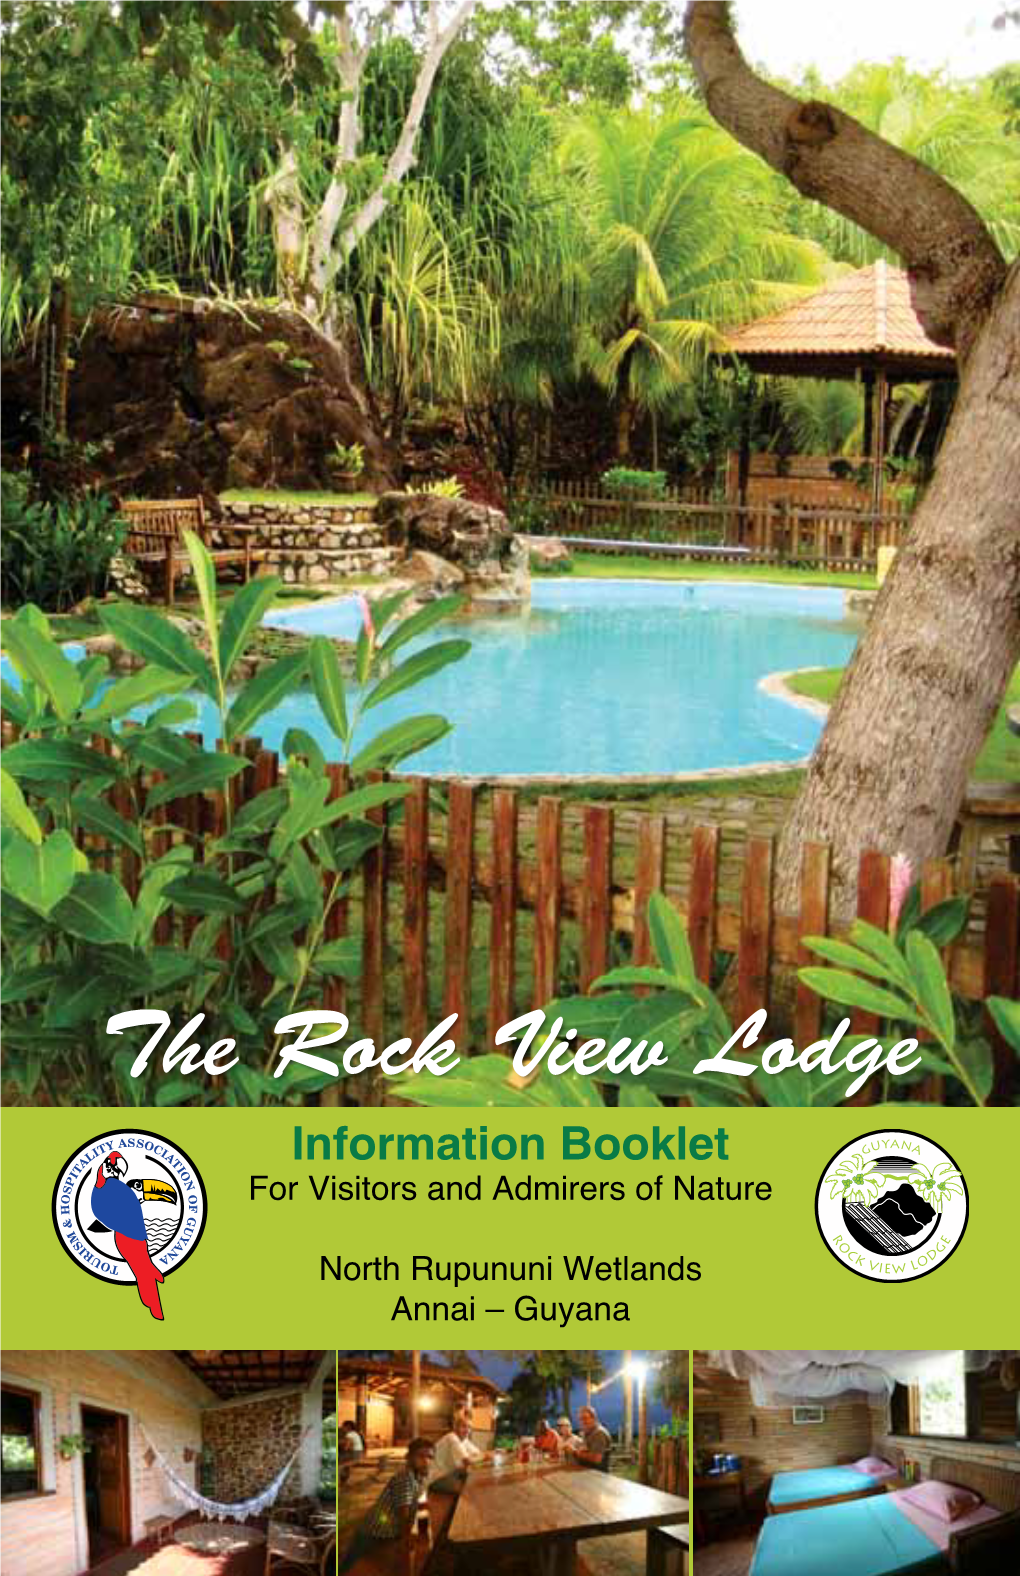 The Rock View Lodge Information Booklet for Visitors and Admirers of Nature